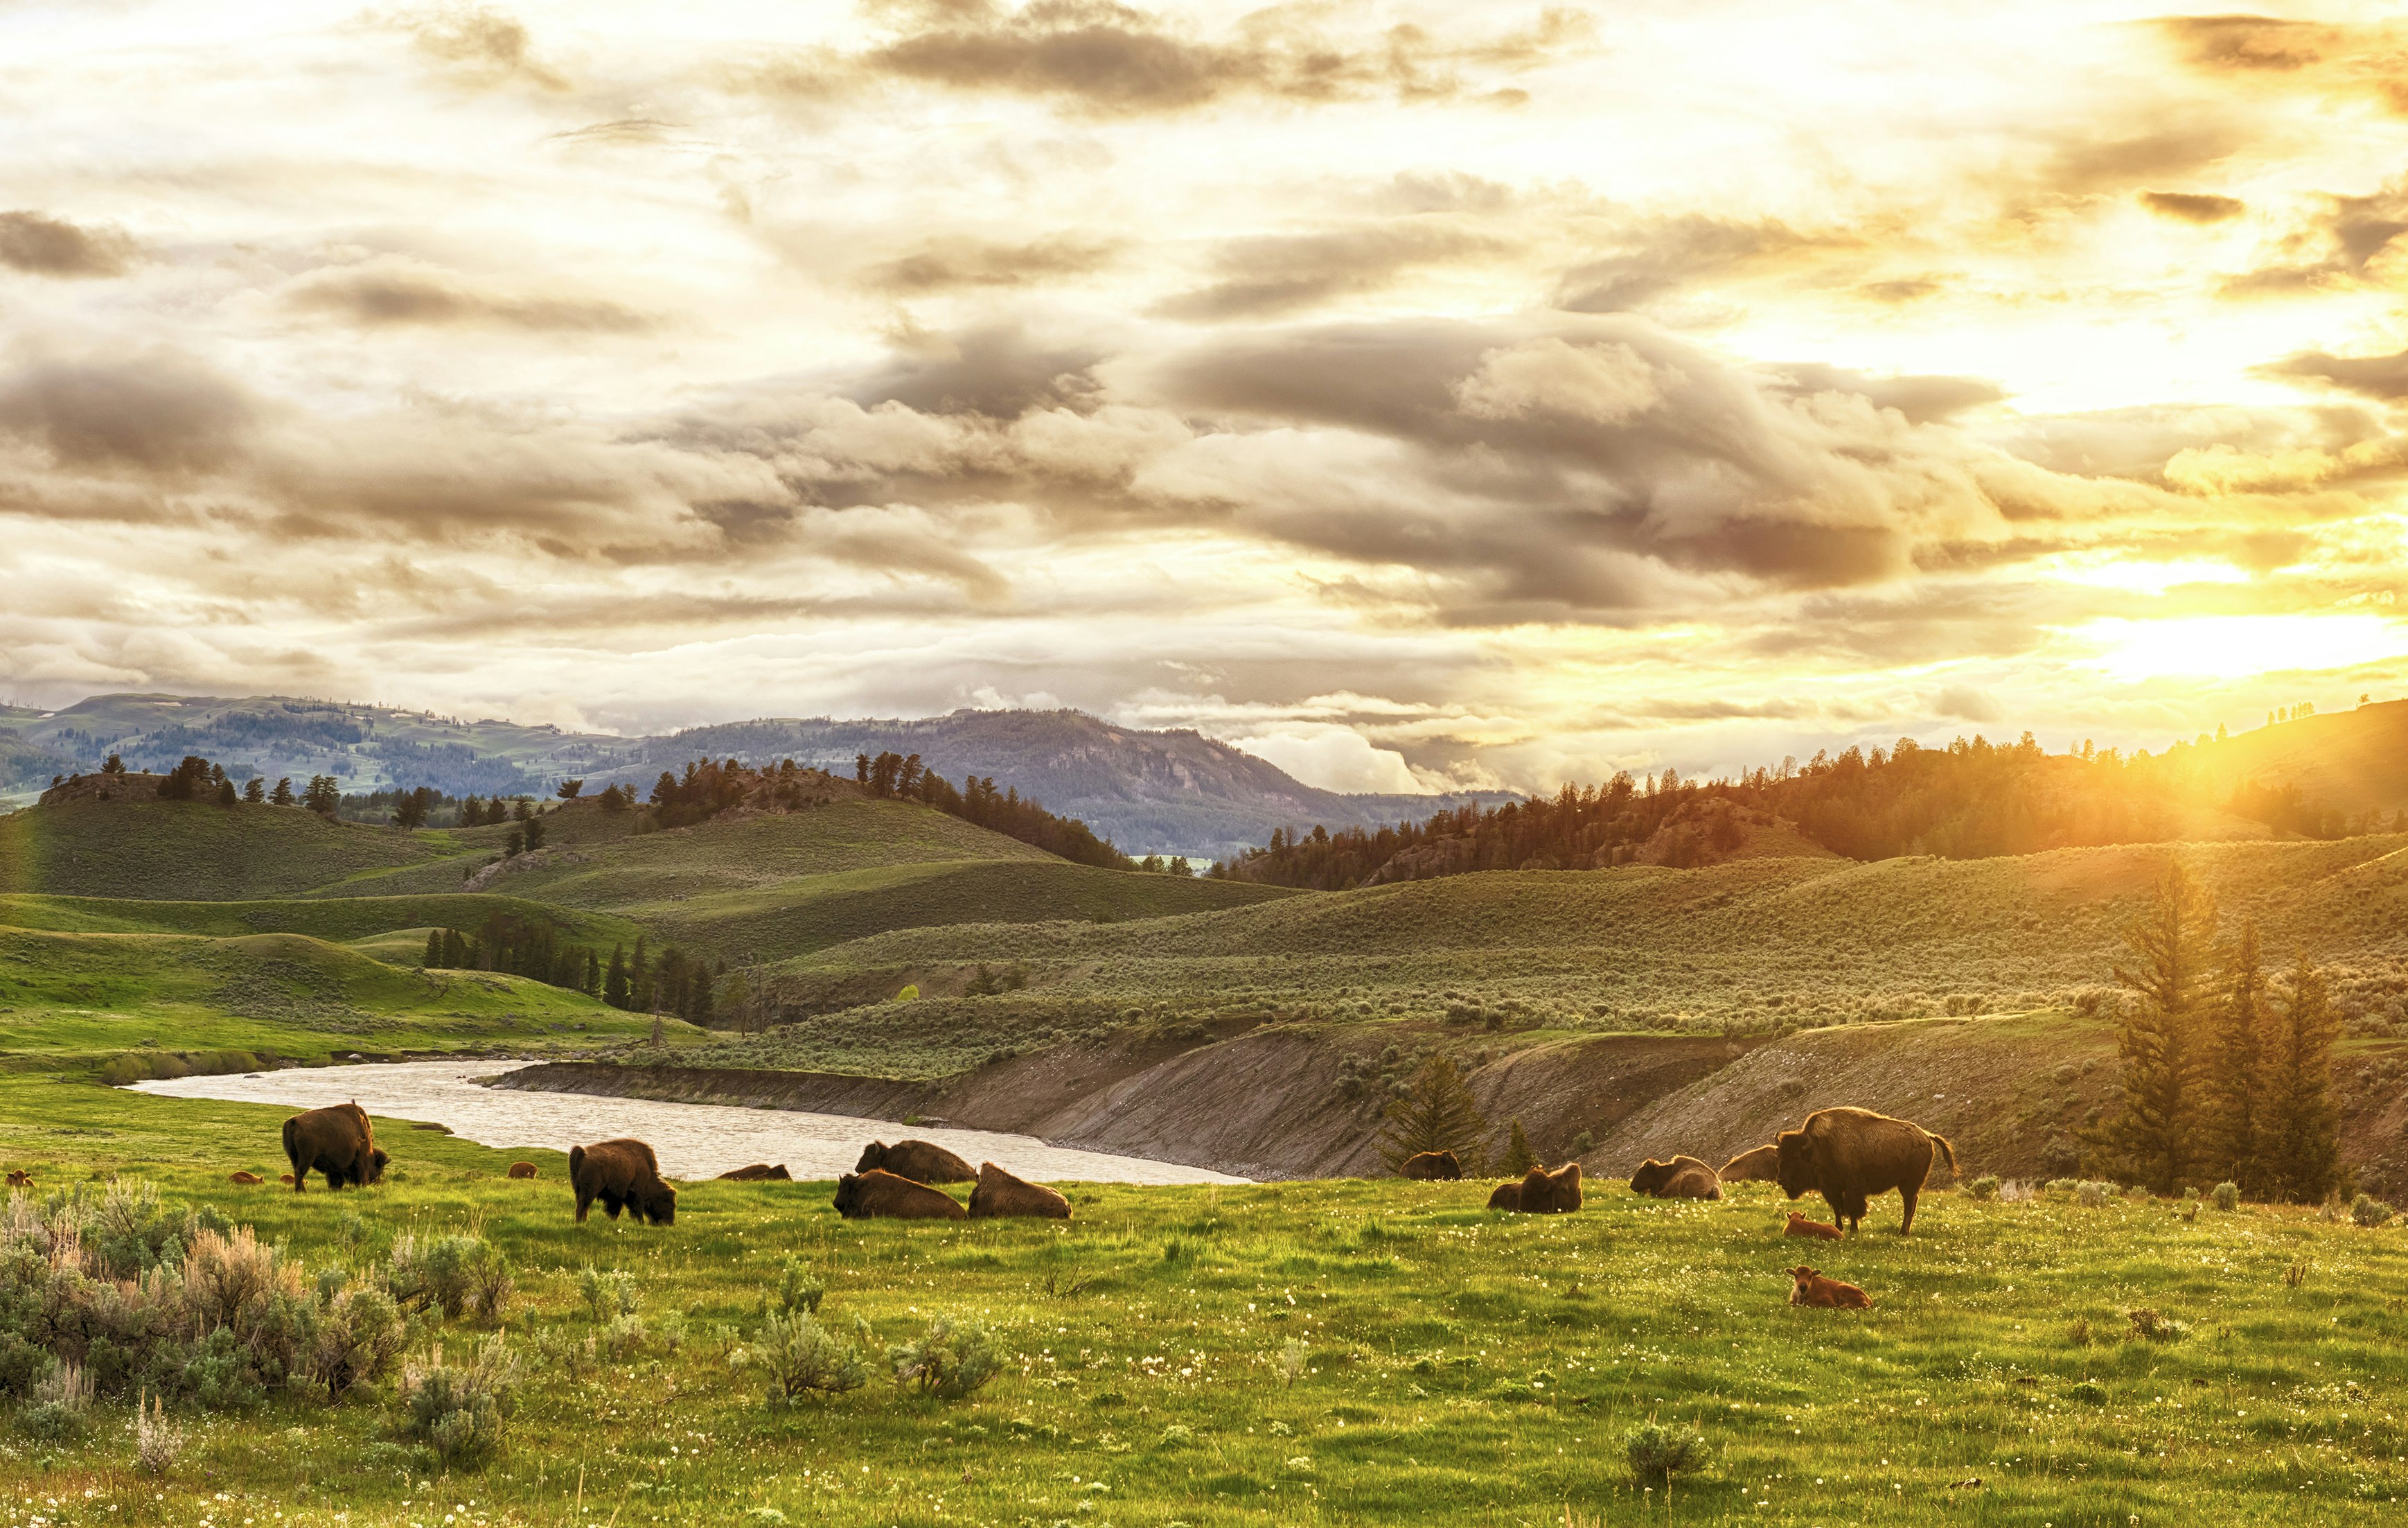 An image of bison on grassy plains with lakes and mountains in the distance.